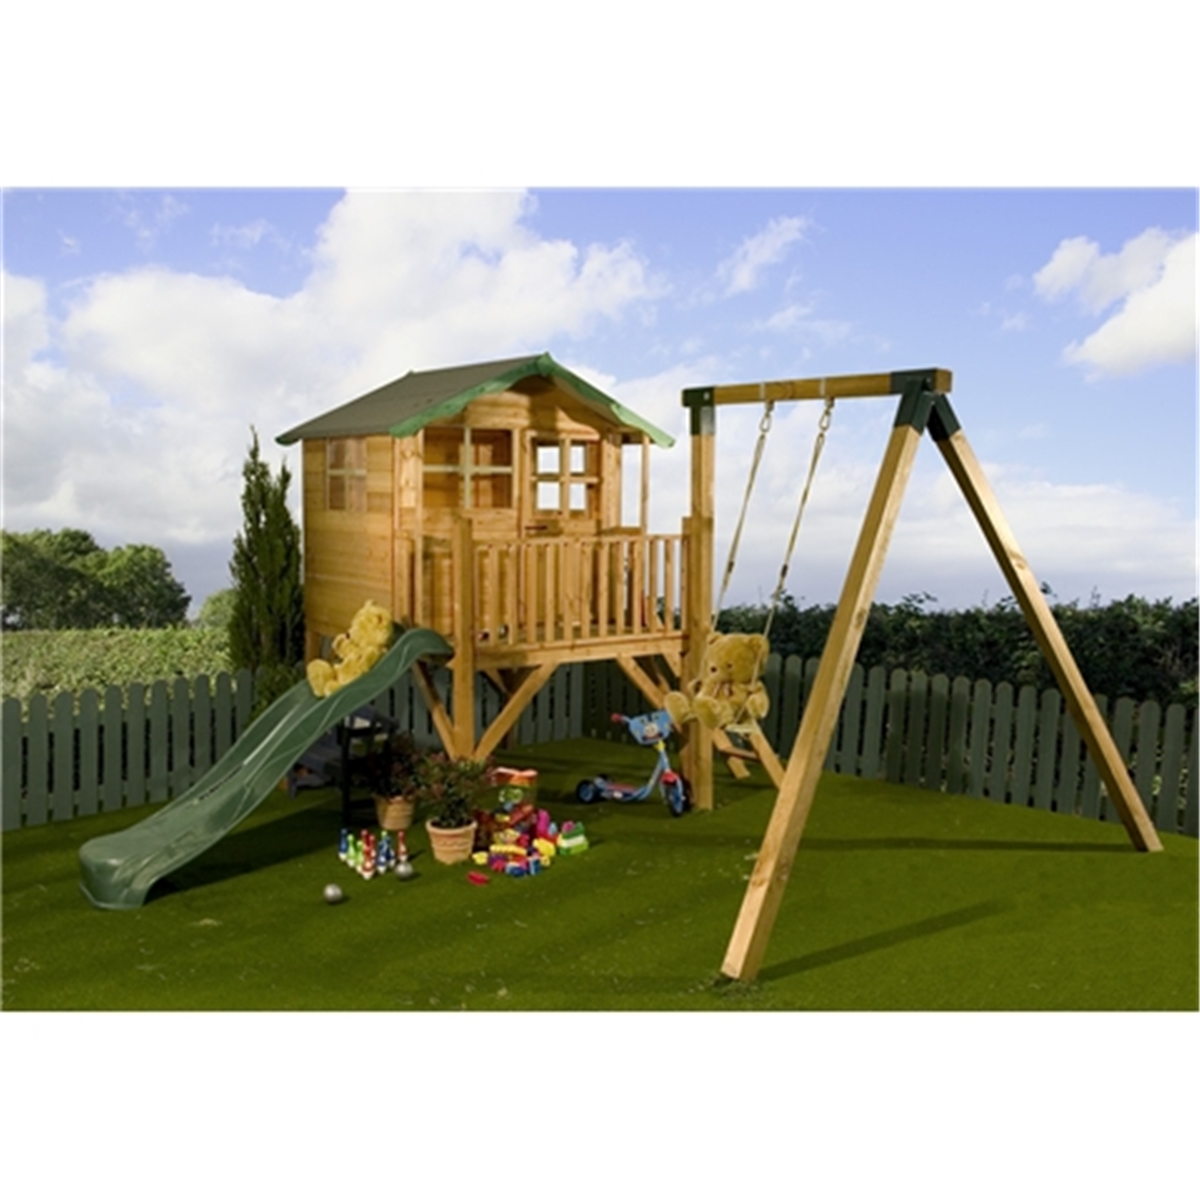 Installed 5 X 7 Wooden Tower Playhouse With Slide And Swing Includes